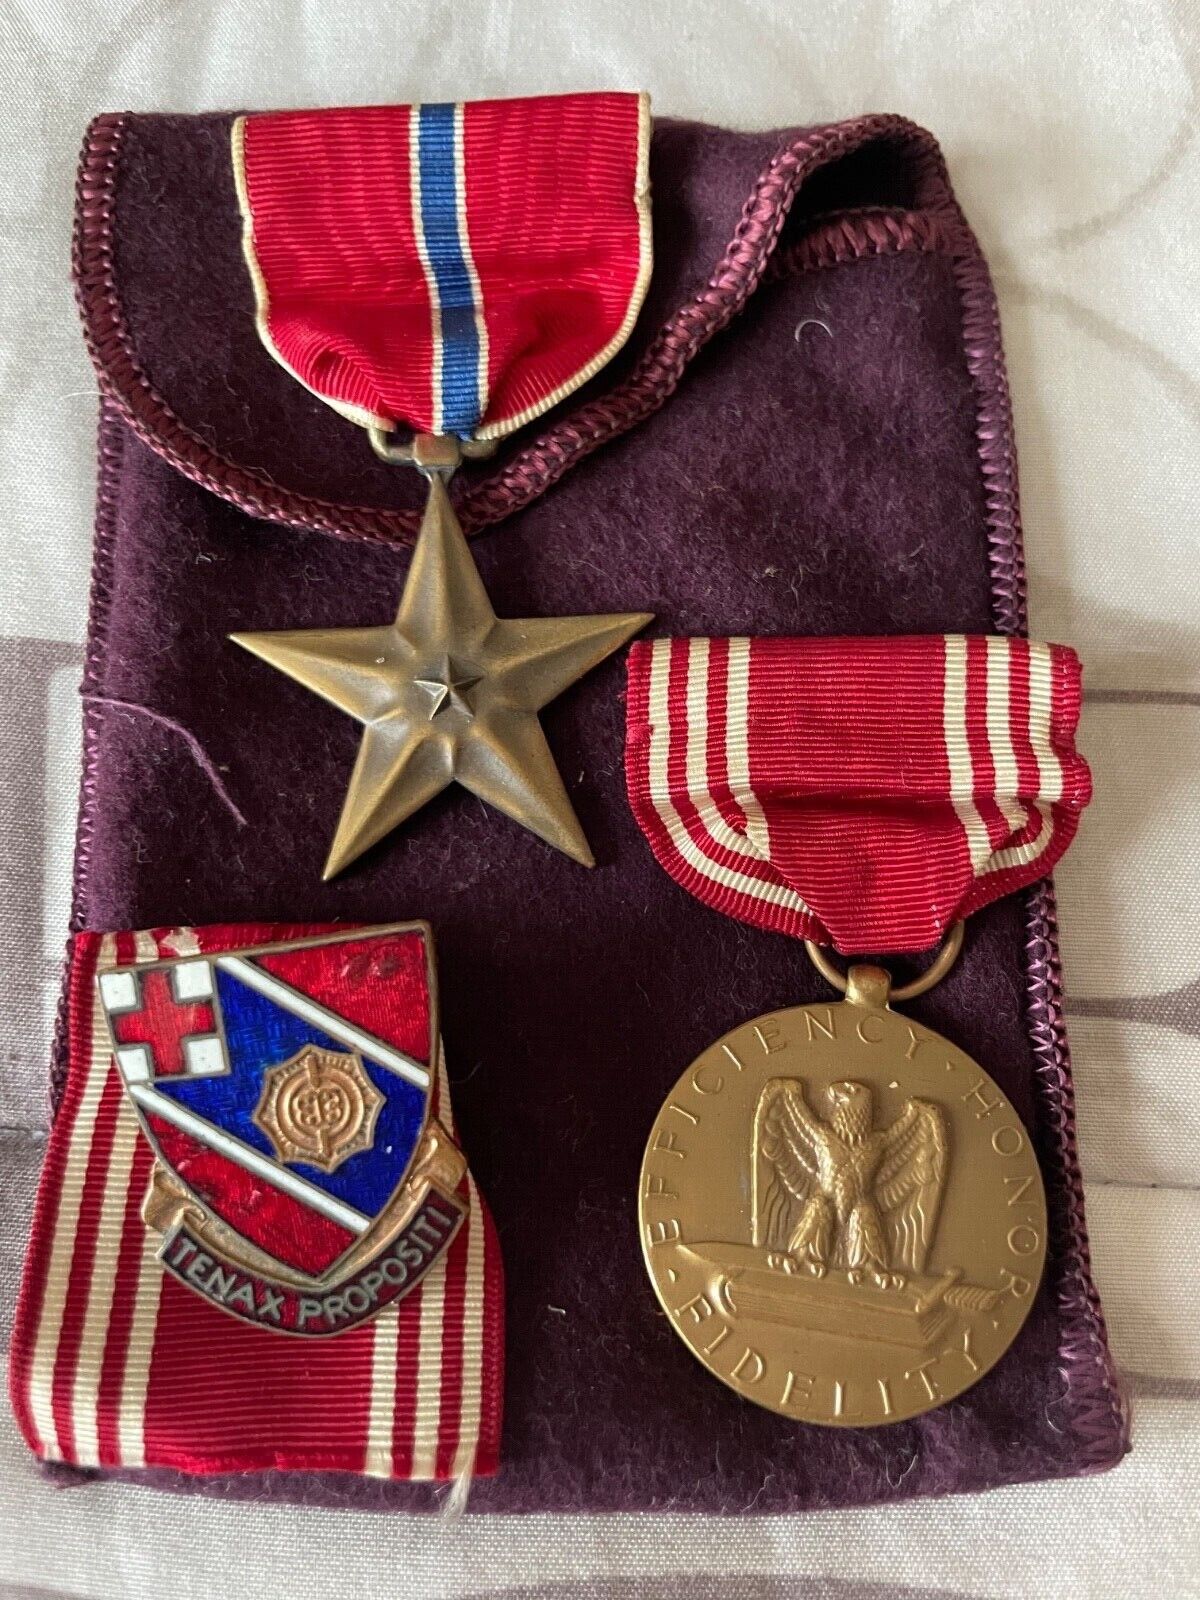  WW2 Era US Army Military Bronze Star Medal Ribbon Pin & Others Lot of 3